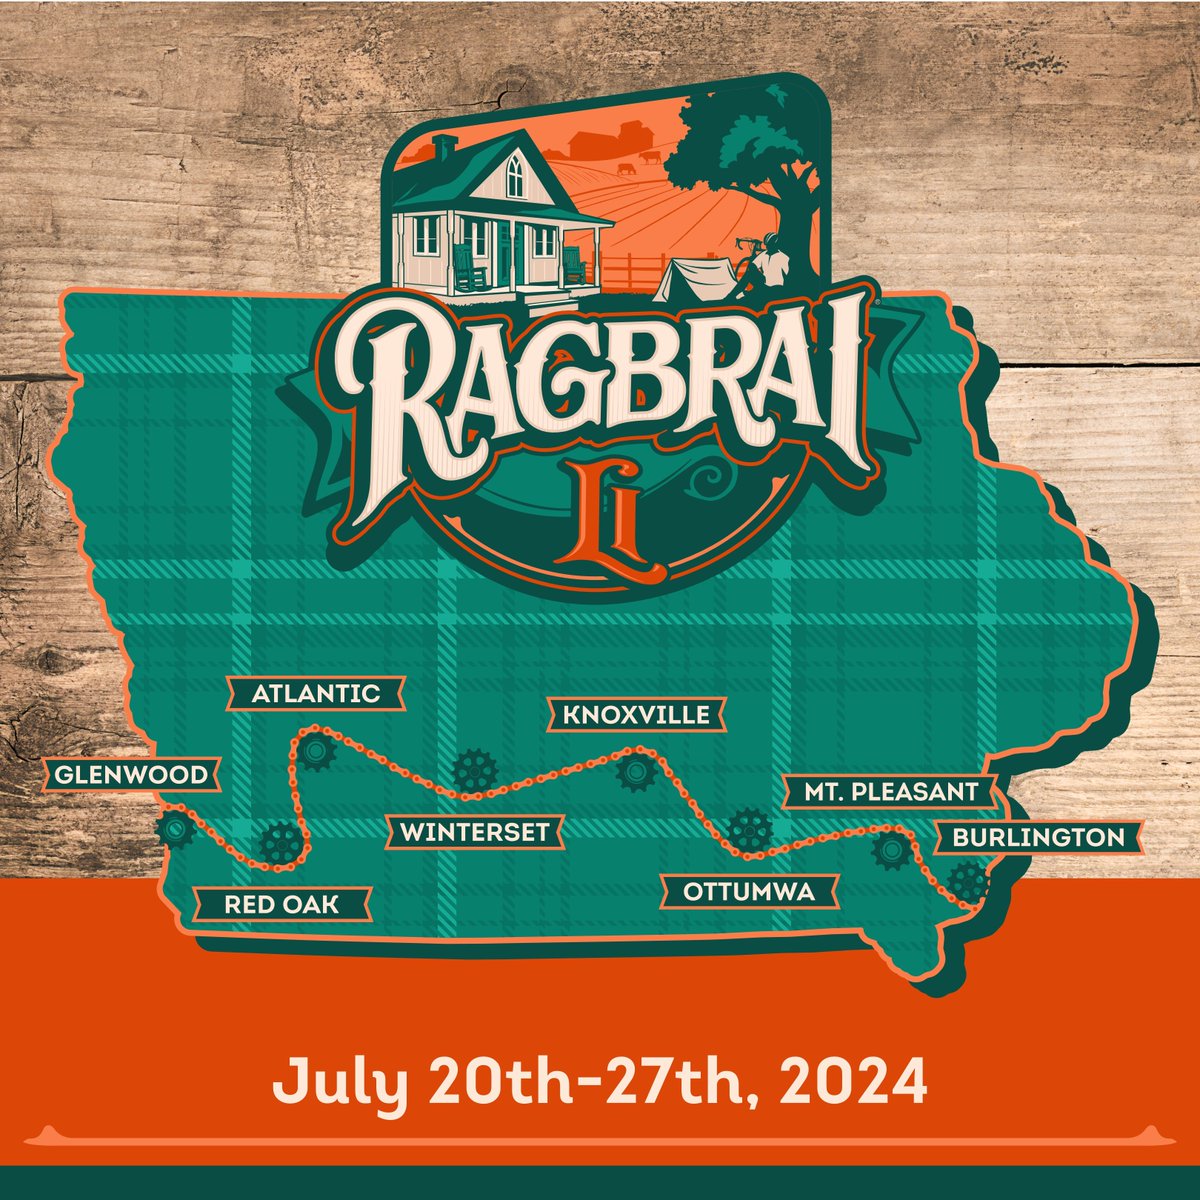 Glenwood, Red Oak, Atlantic, Winterset, Knoxville, Ottumwa, Mt. Pleasant, and Burlington - your RAGBRAI 2024 route! This will be our eighth shortest route but hilliest ever RAGBRAI, 434 miles and 18,741 feet of climb. Join us: ragbrai.com/ragbrai-li-reg…